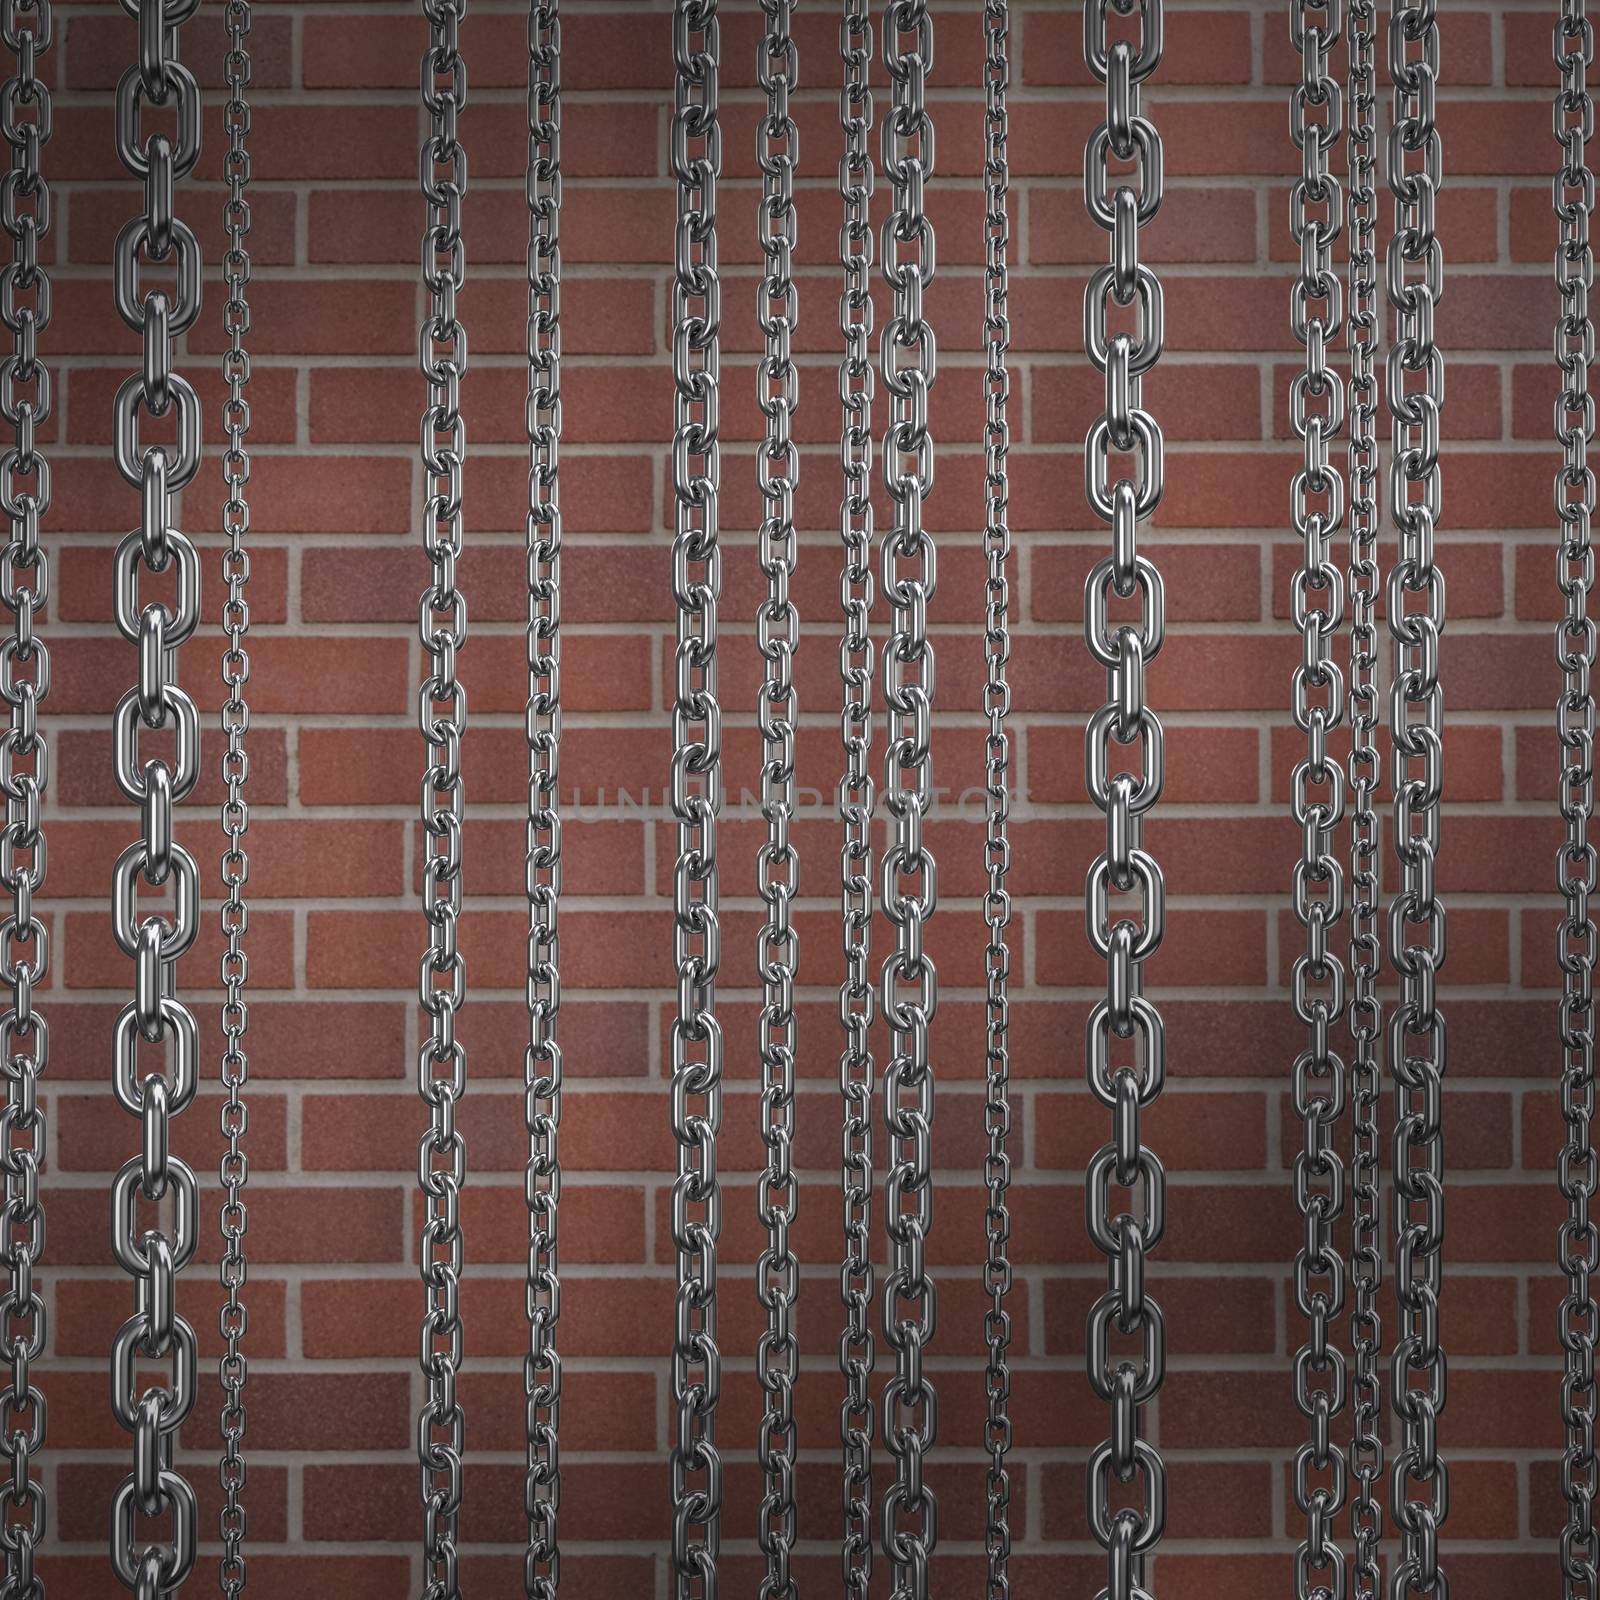 Composite image of row of silver metallic chains  by Wavebreakmedia